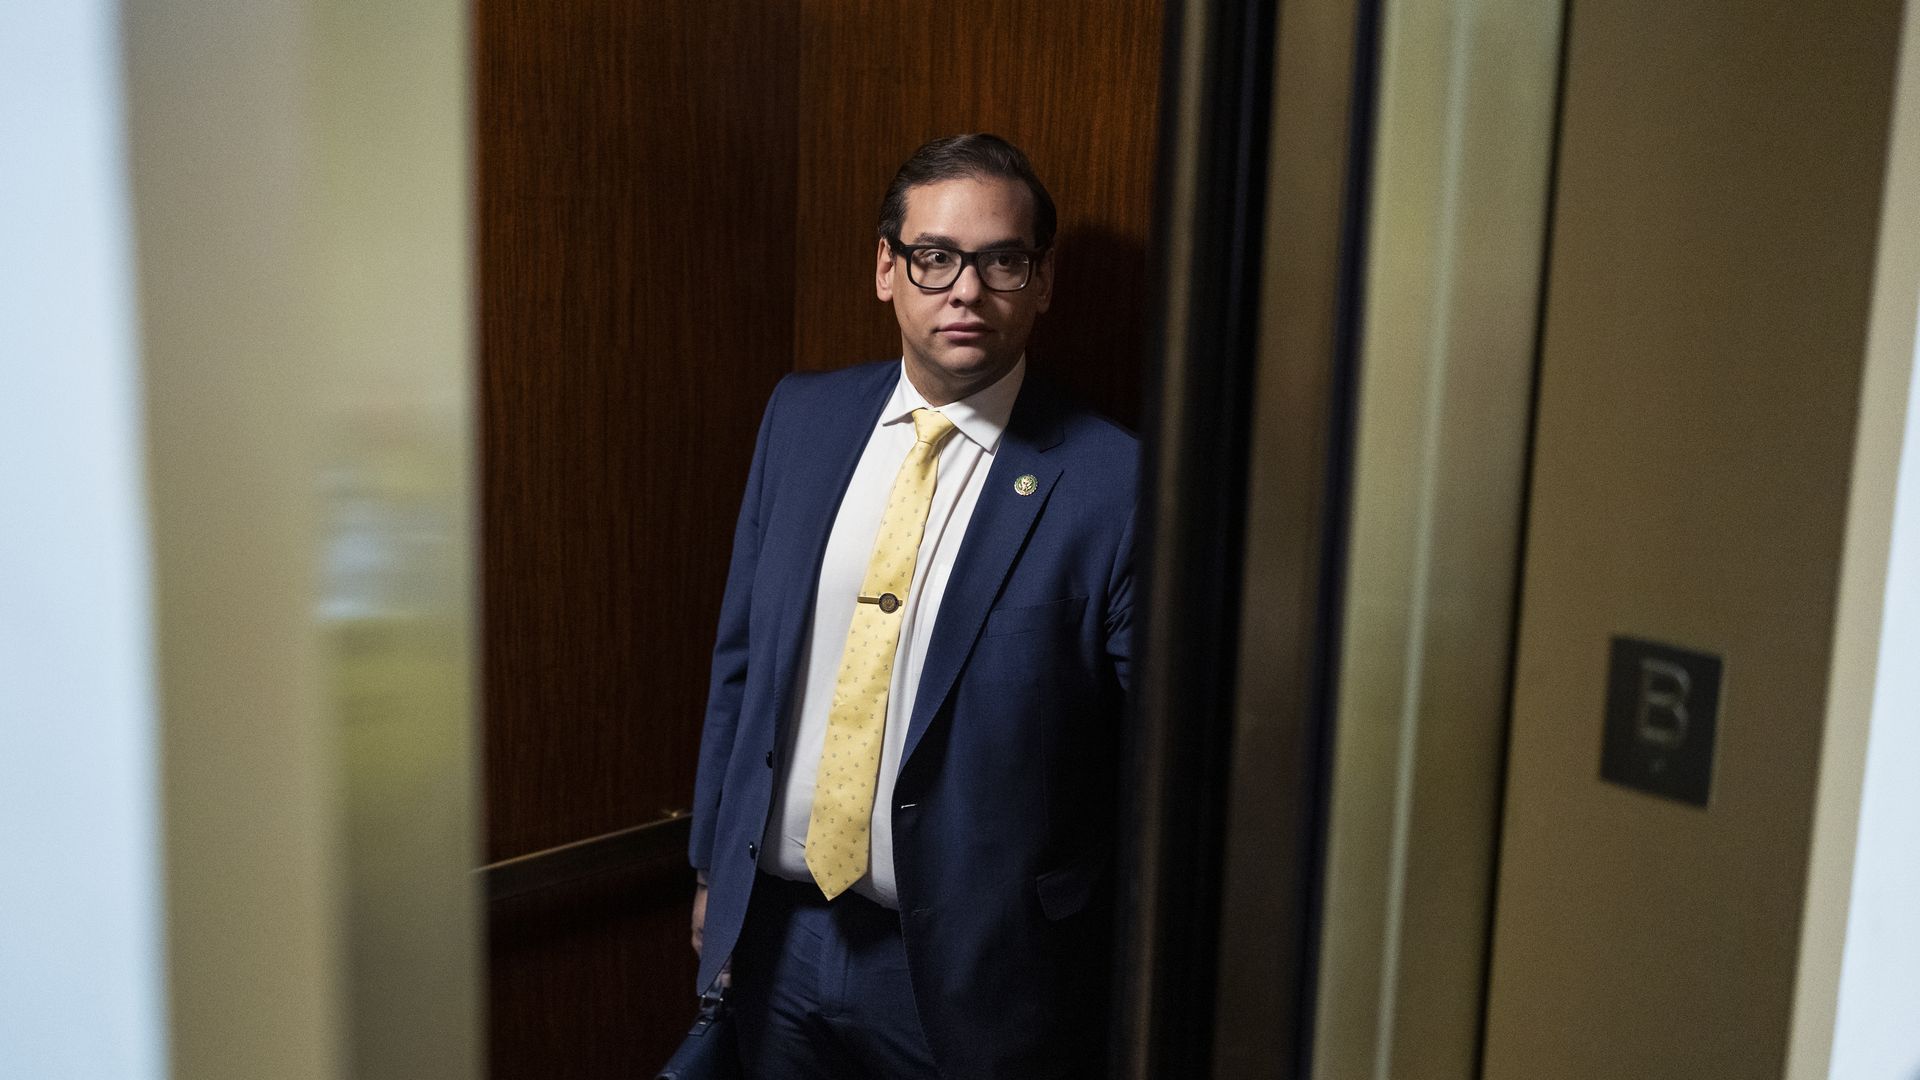 Rep. George Santos, wearing a blue suit jacket, white shirt and yellow tie, stands in an elevator at the Capitol.